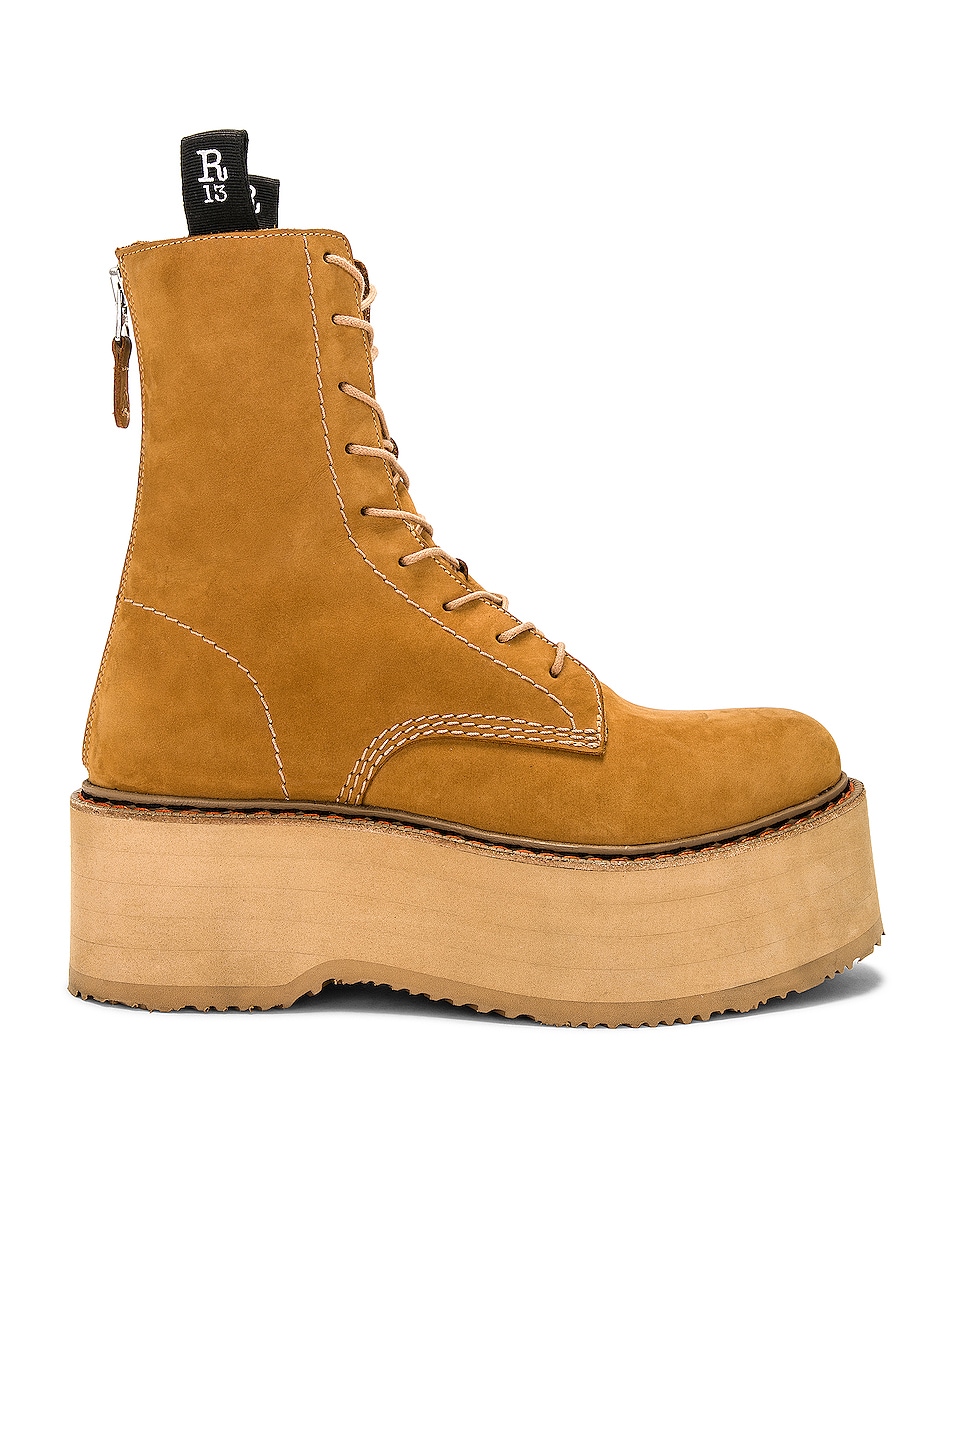 Image 1 of R13 Double Stack Boot in Tan Nubuck